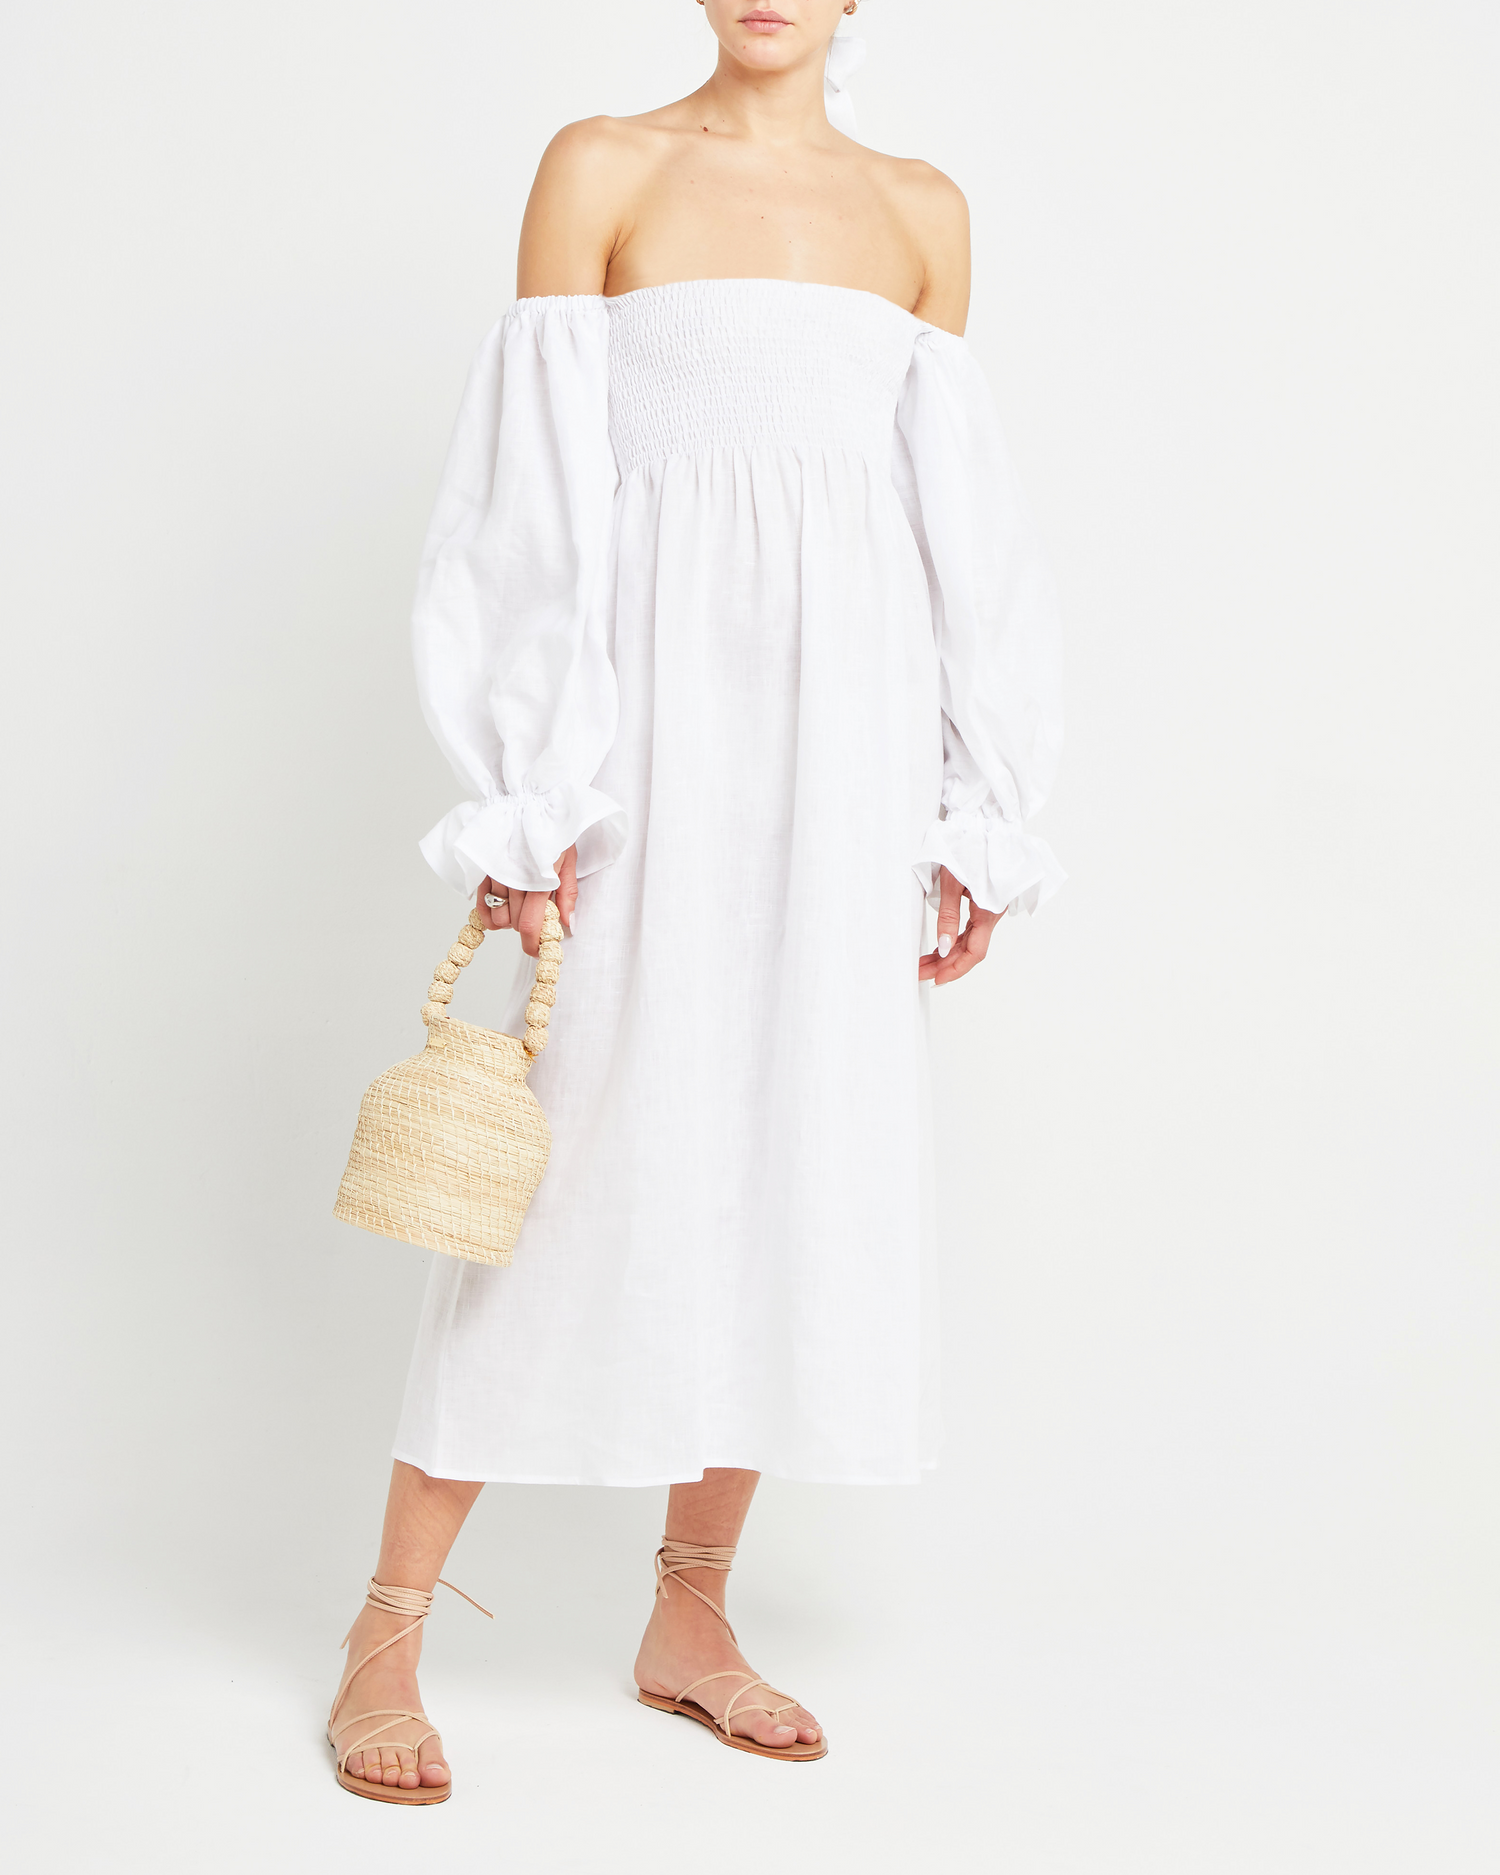 Fifth image of Athena Dress, a white midi dress, off shoulder, long sleeve, puff sleeves, smocked